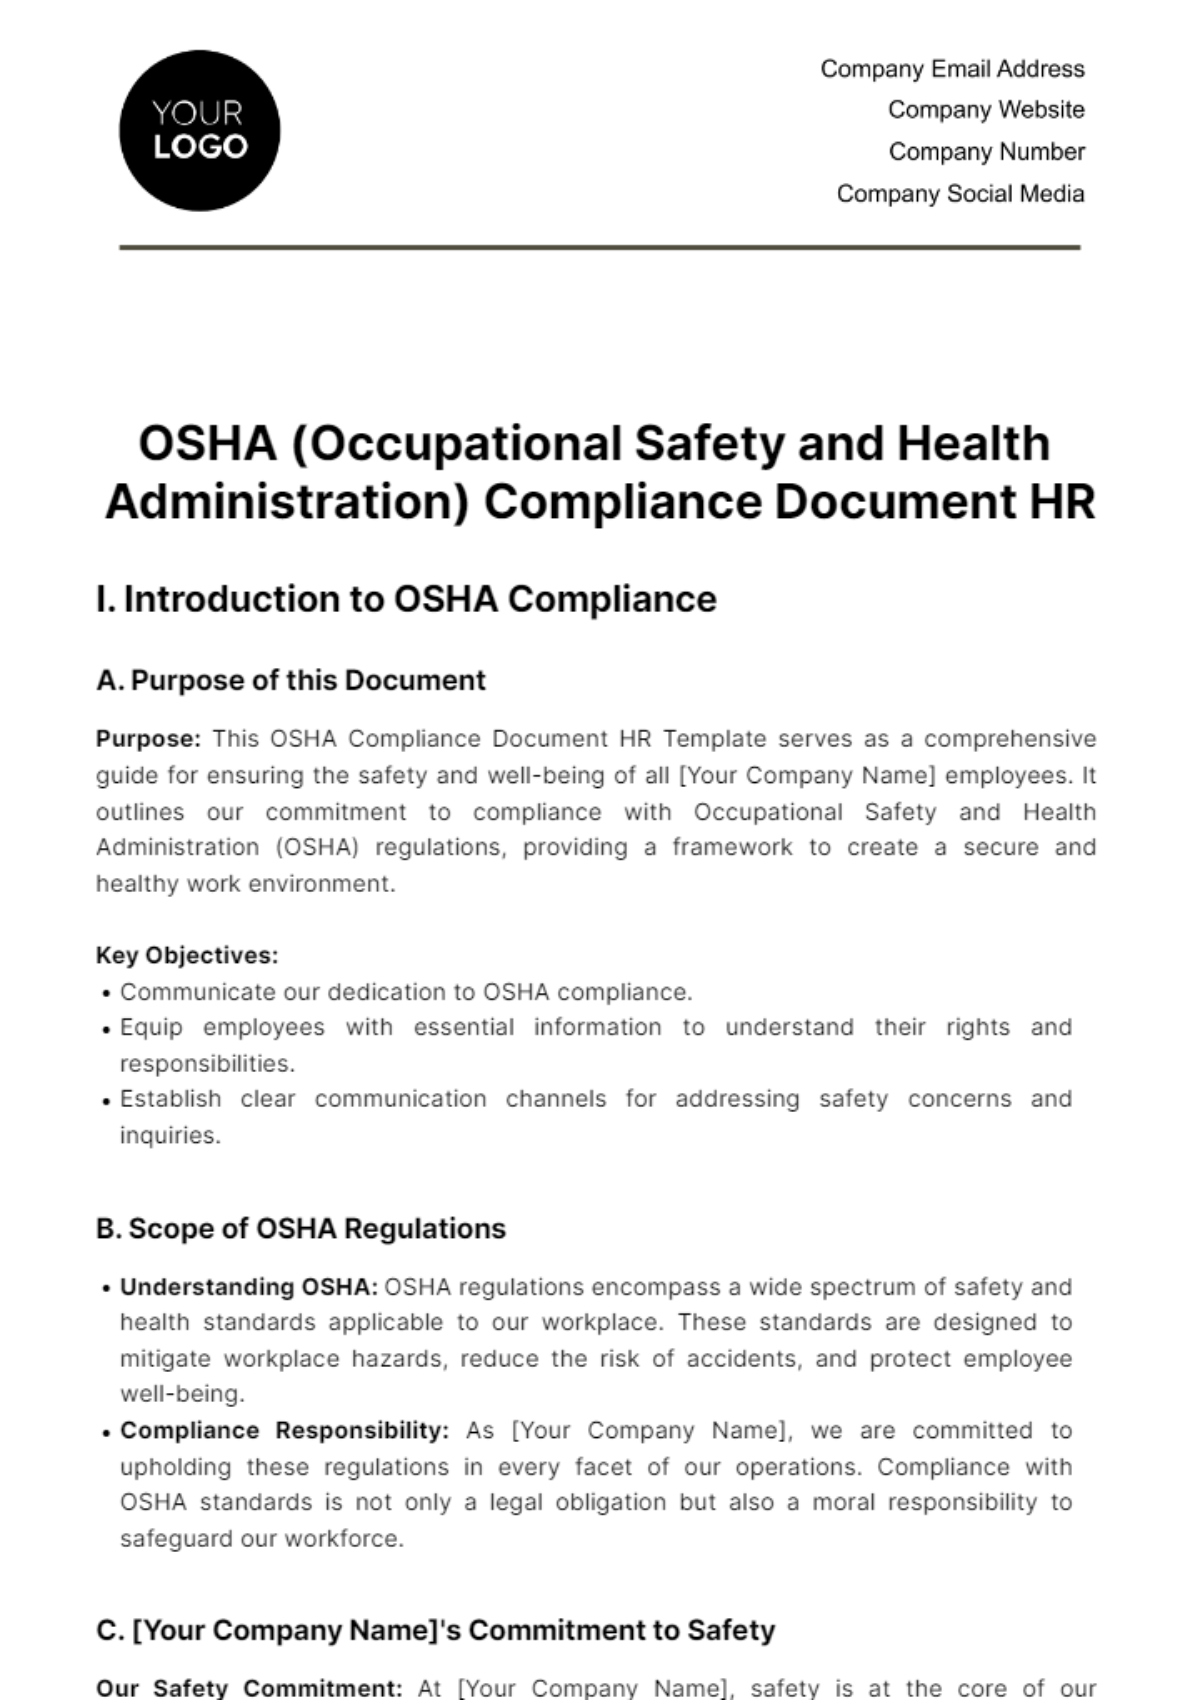 Free OSHA (Occupational Safety and Health Administration) Compliance Document HR Template